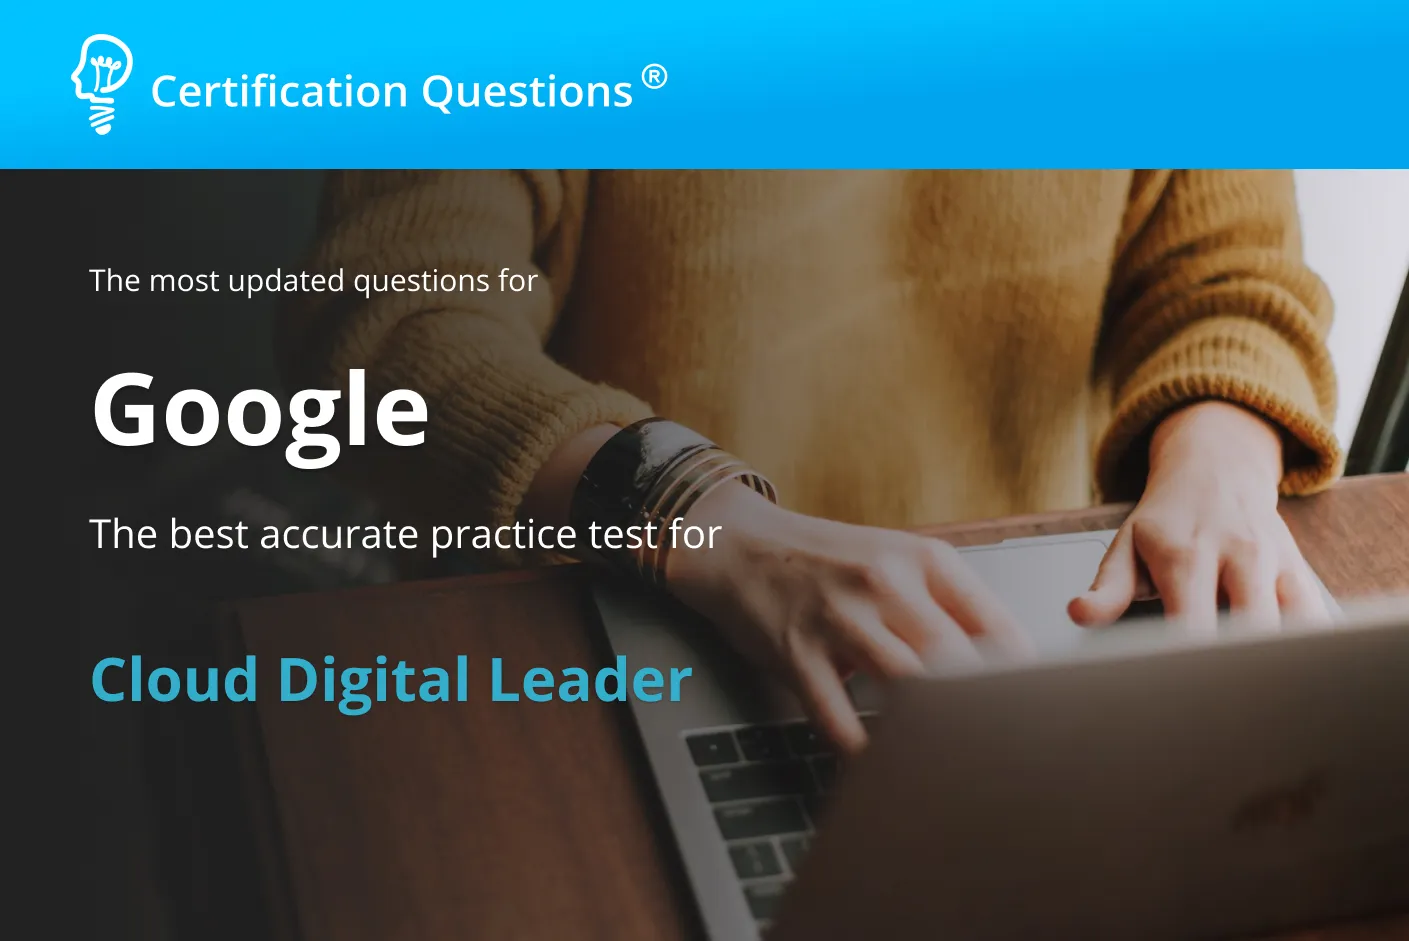 This image is related to Google Digital Cloud Leader Practice Exam